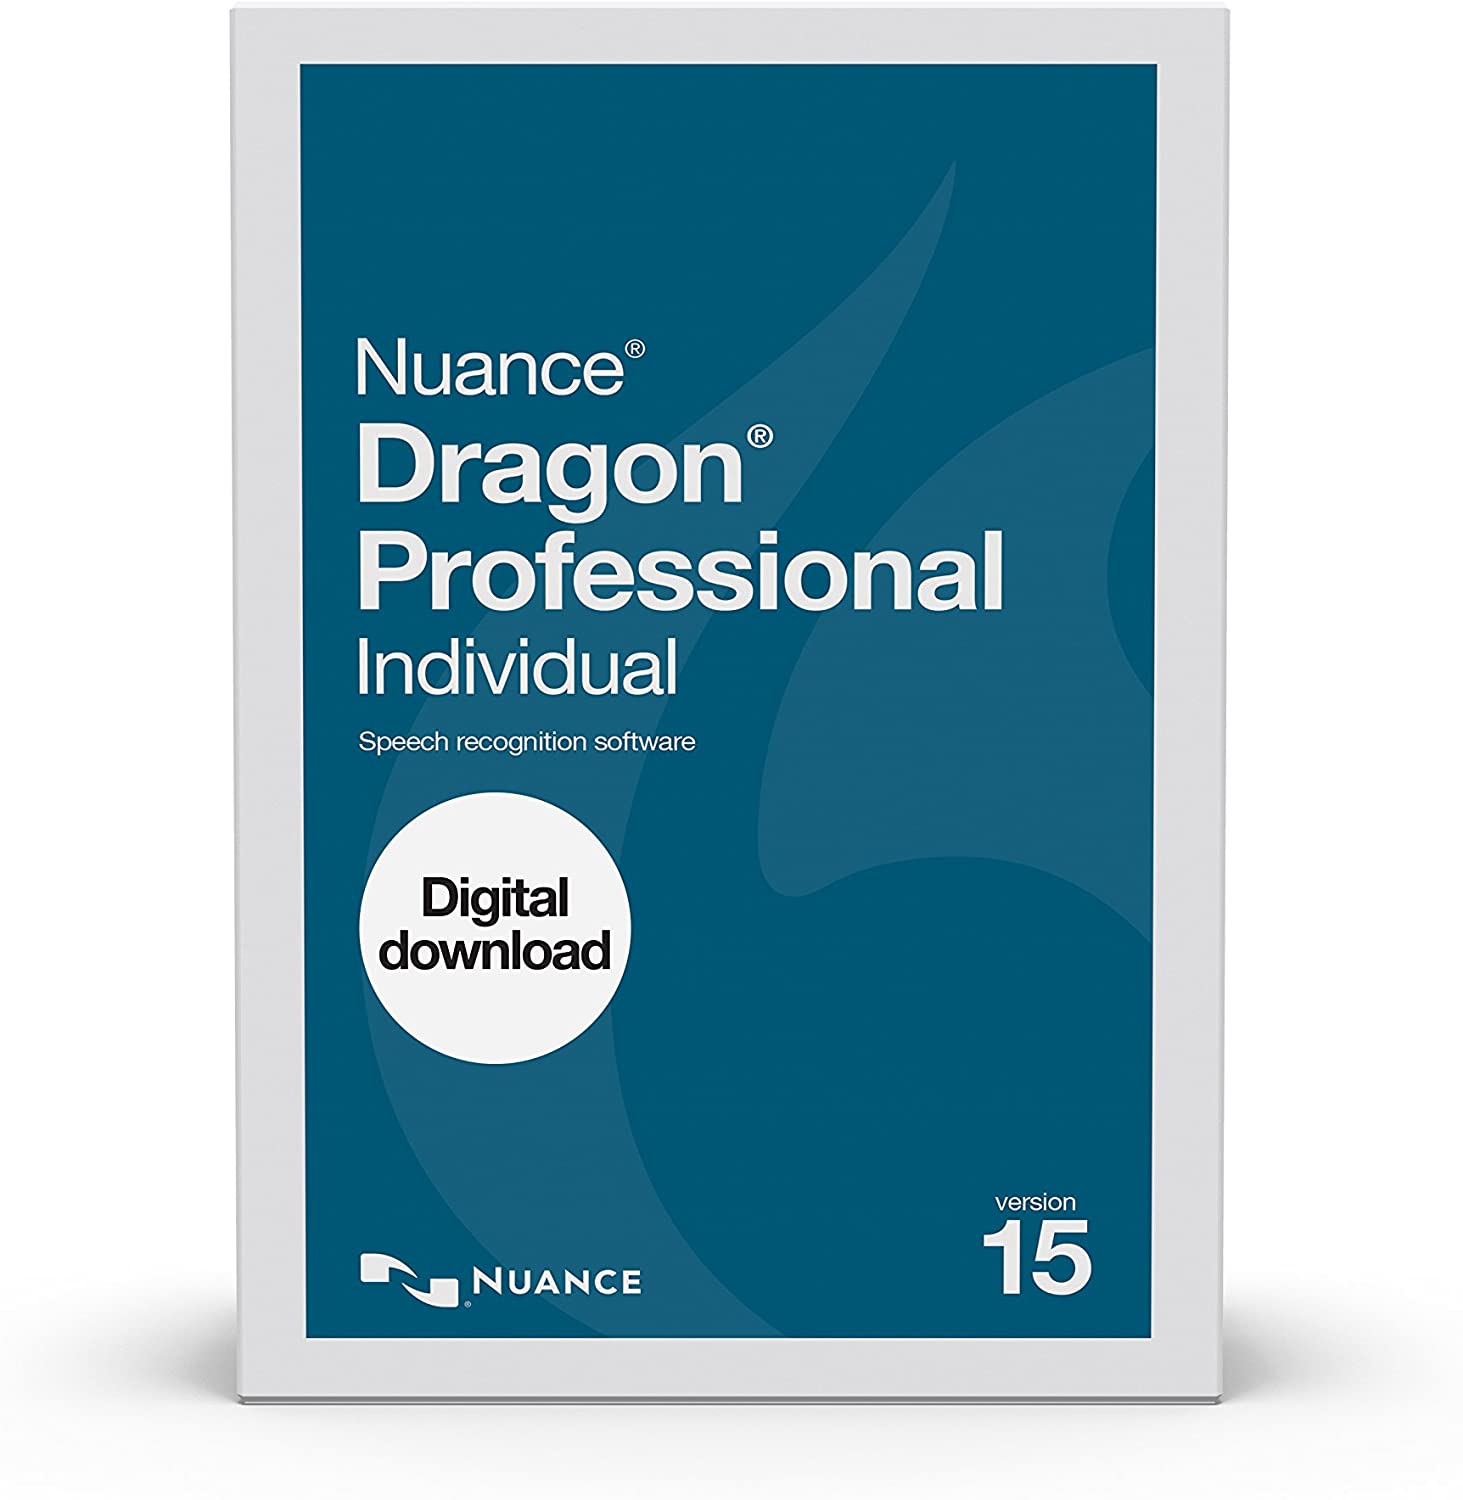 Dragon professional nuance proposed solution to implement change in healthcare